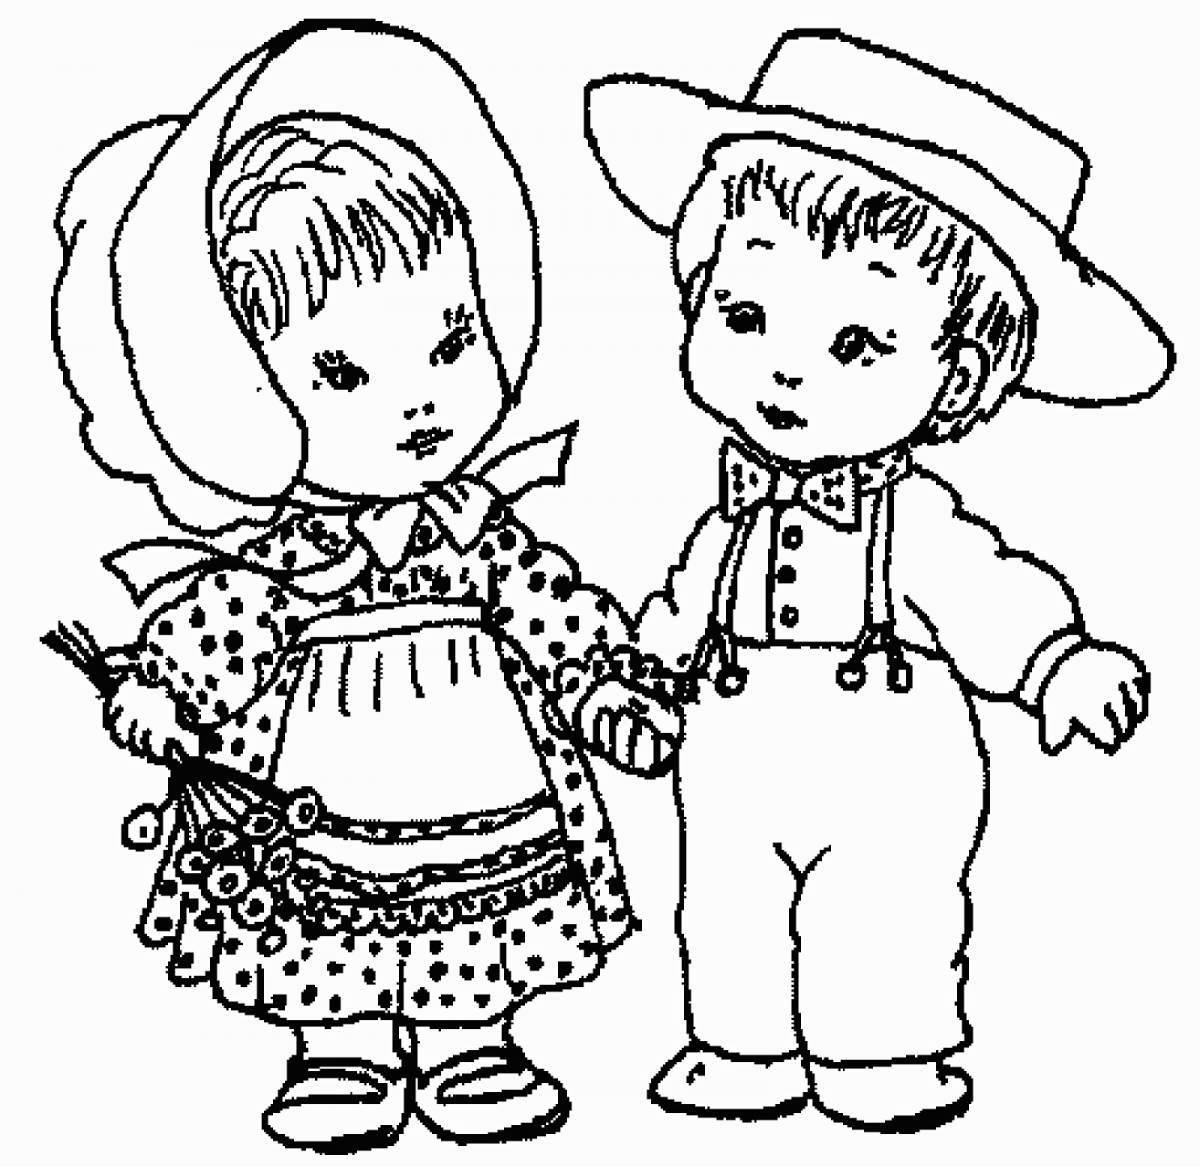 Fun coloring pages for boys and girls